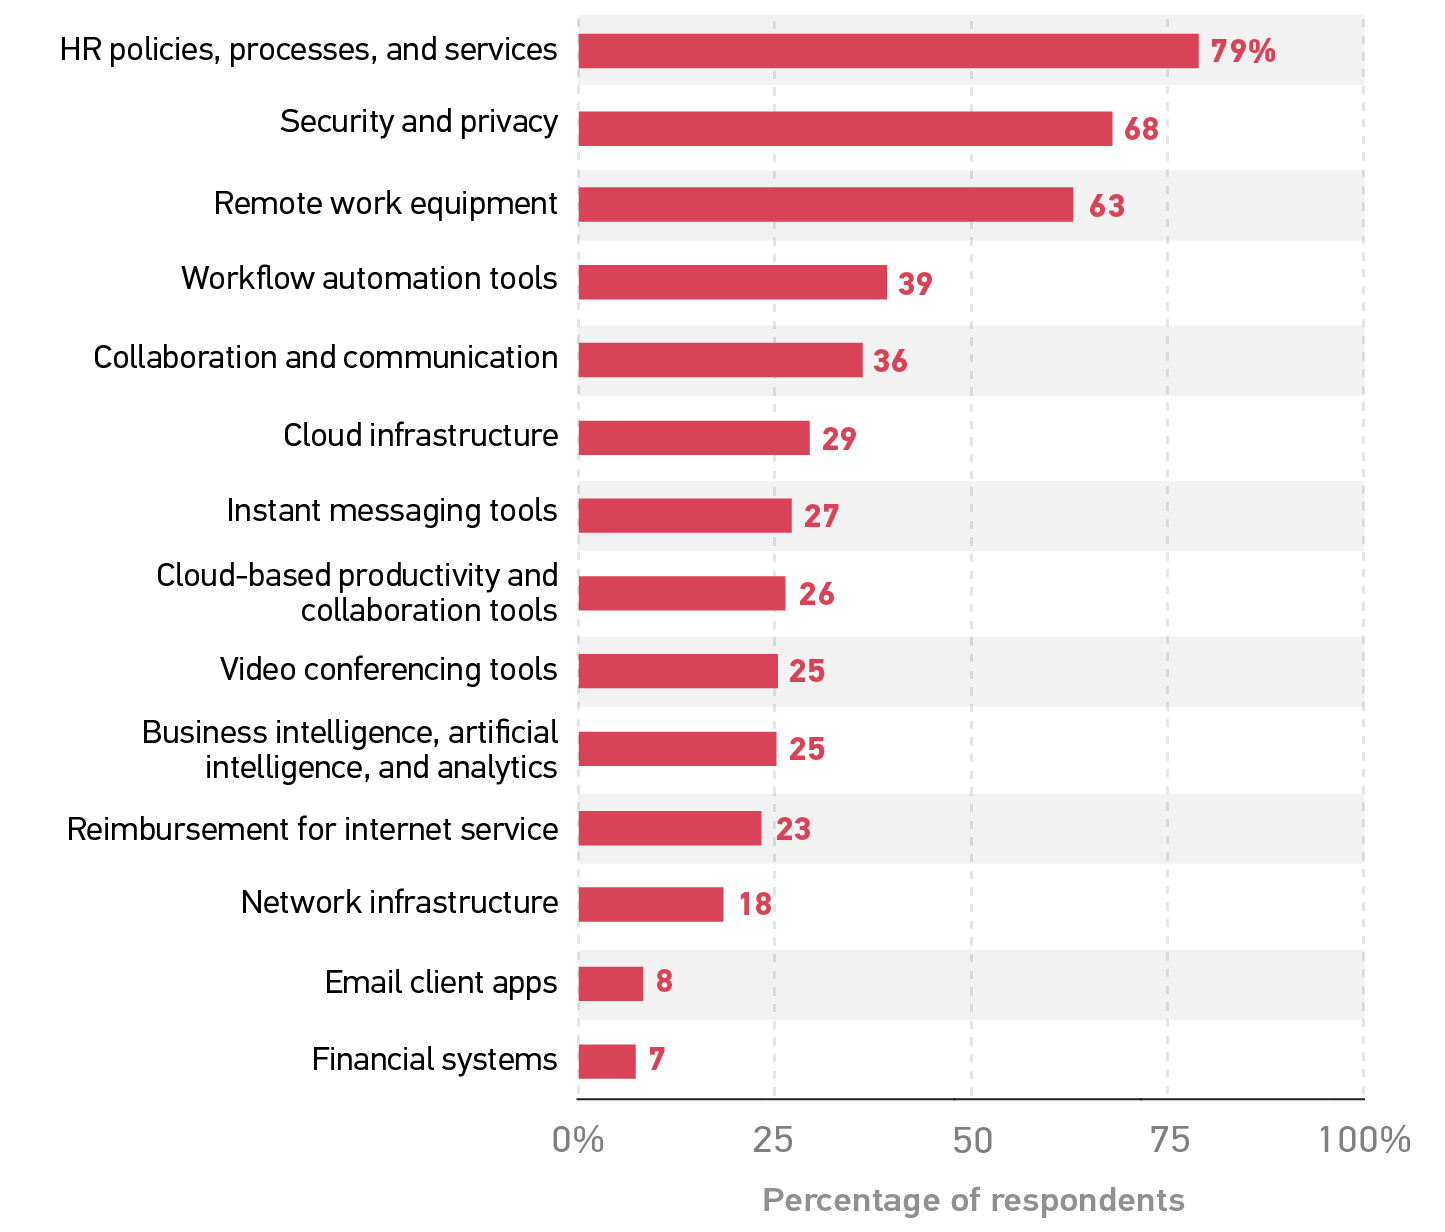 Bar graph showing percentage of respondents who said each tool/practice would need expansion to support ongoing remote work.
HR policies, processes, and services 79%;
Security and privacy 68;
Remote work equipment 63;
Workflow automation tools 39;
Collaboration and communication 36;
Cloud infrastructure 29;
Instant messaging tools 27;
Cloud-based productivity and collaboration tools 26;
Video conferencing tools 25;
Business intelligence, artificial intelligence, and analytics 25;
Reimbursement for internet service 23;
Network infrastructure 18;
Email client apps 8;
Financial systems 7.